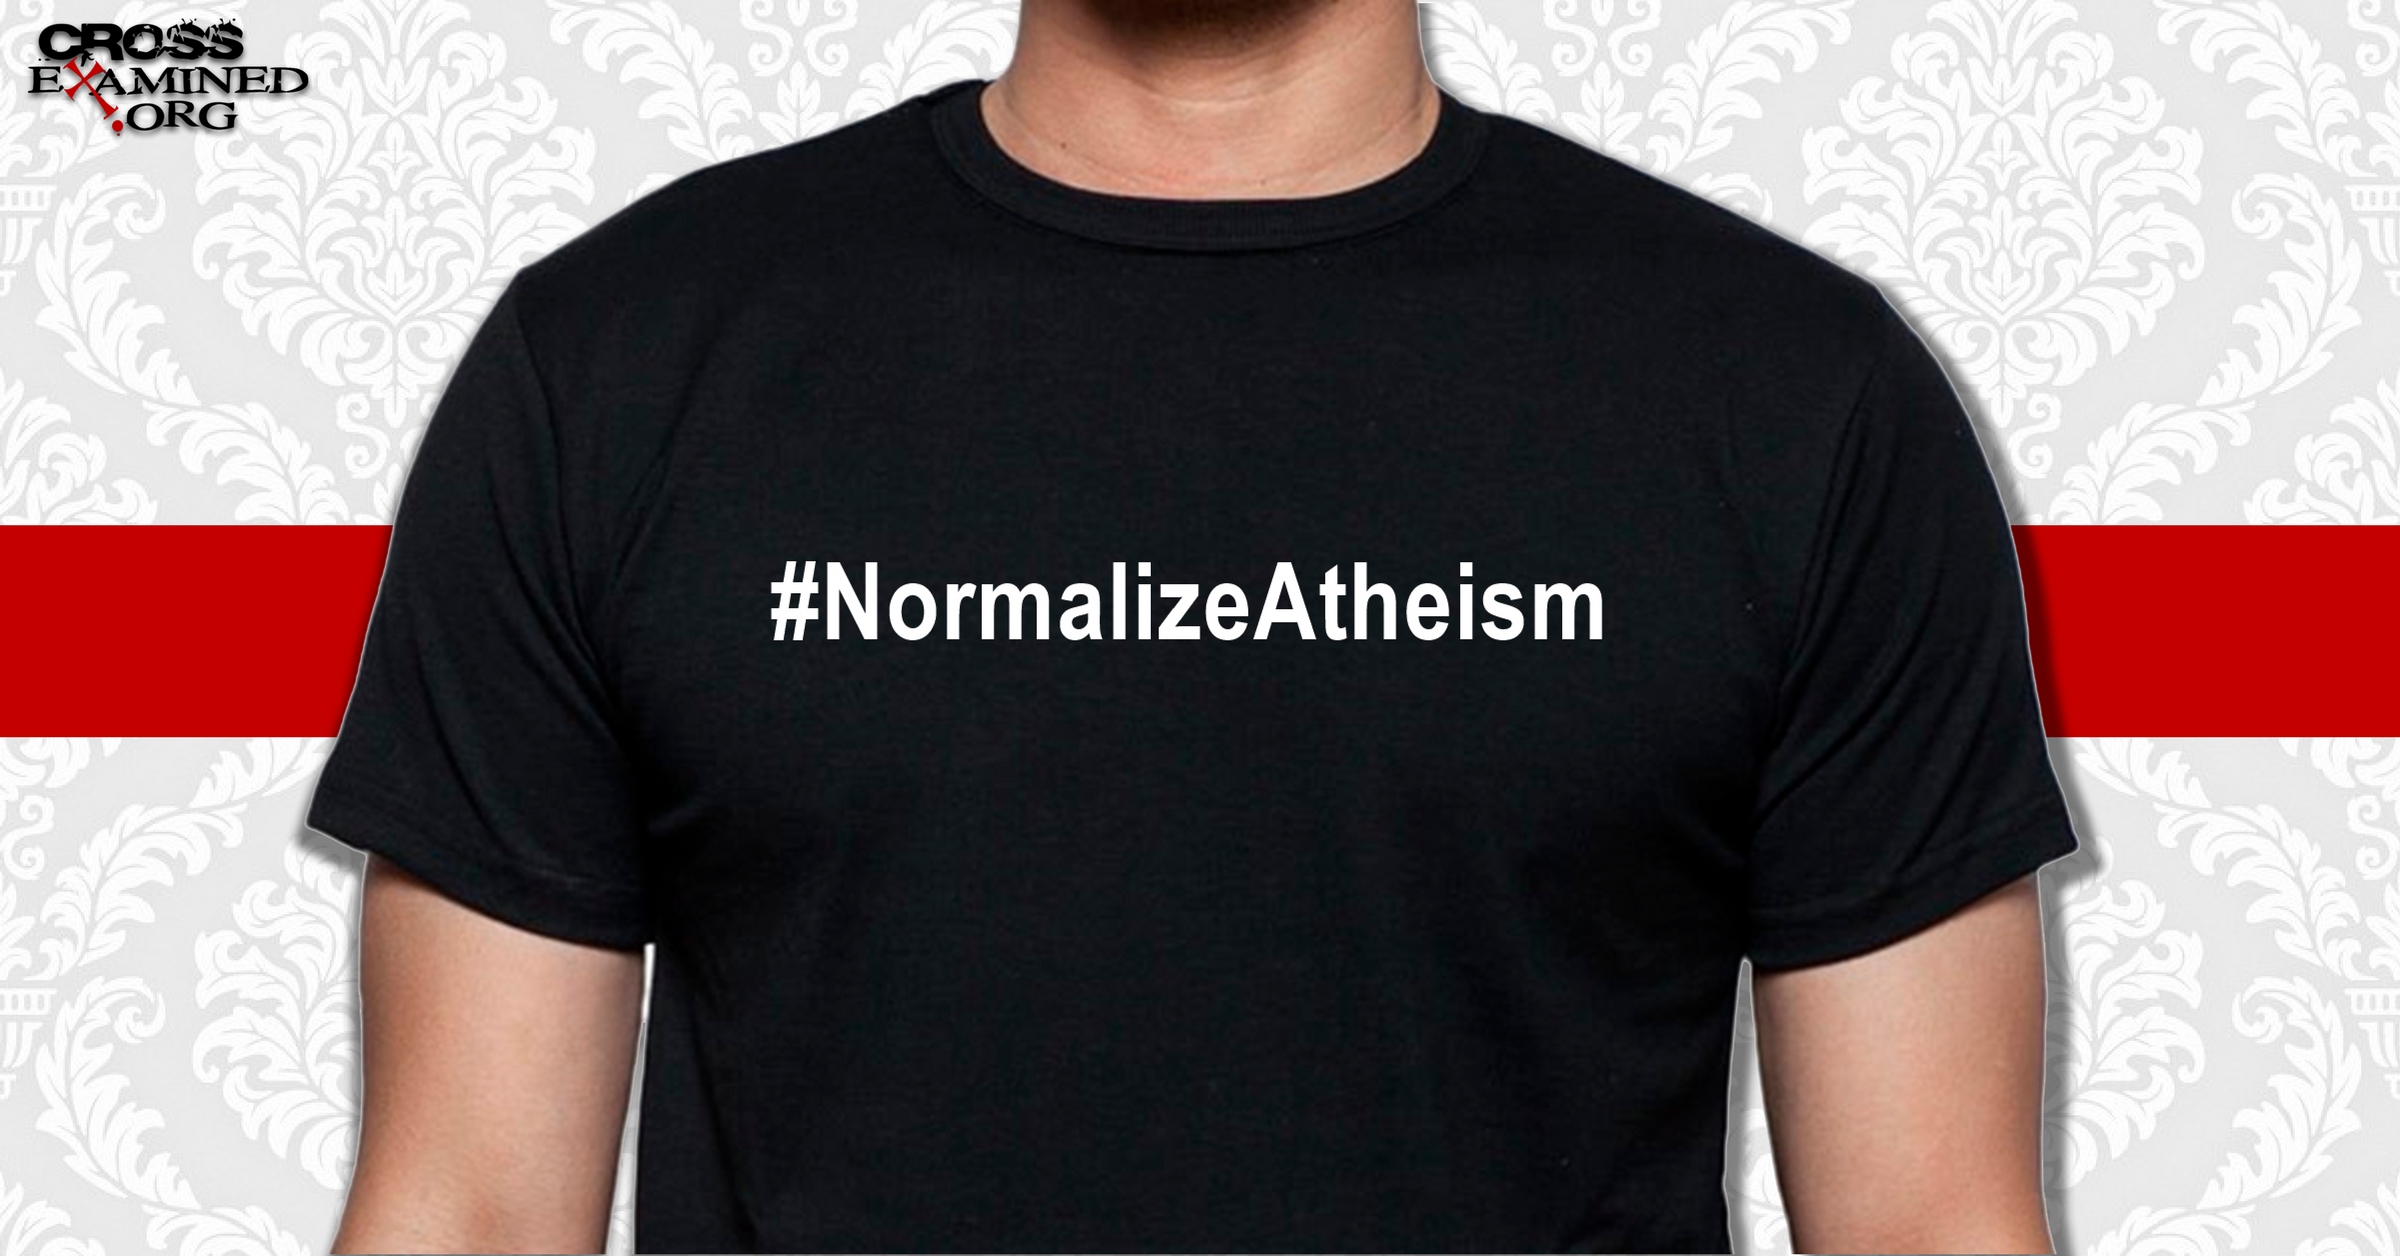 What Christian Parents Should Learn from the Normalize Atheism Movement